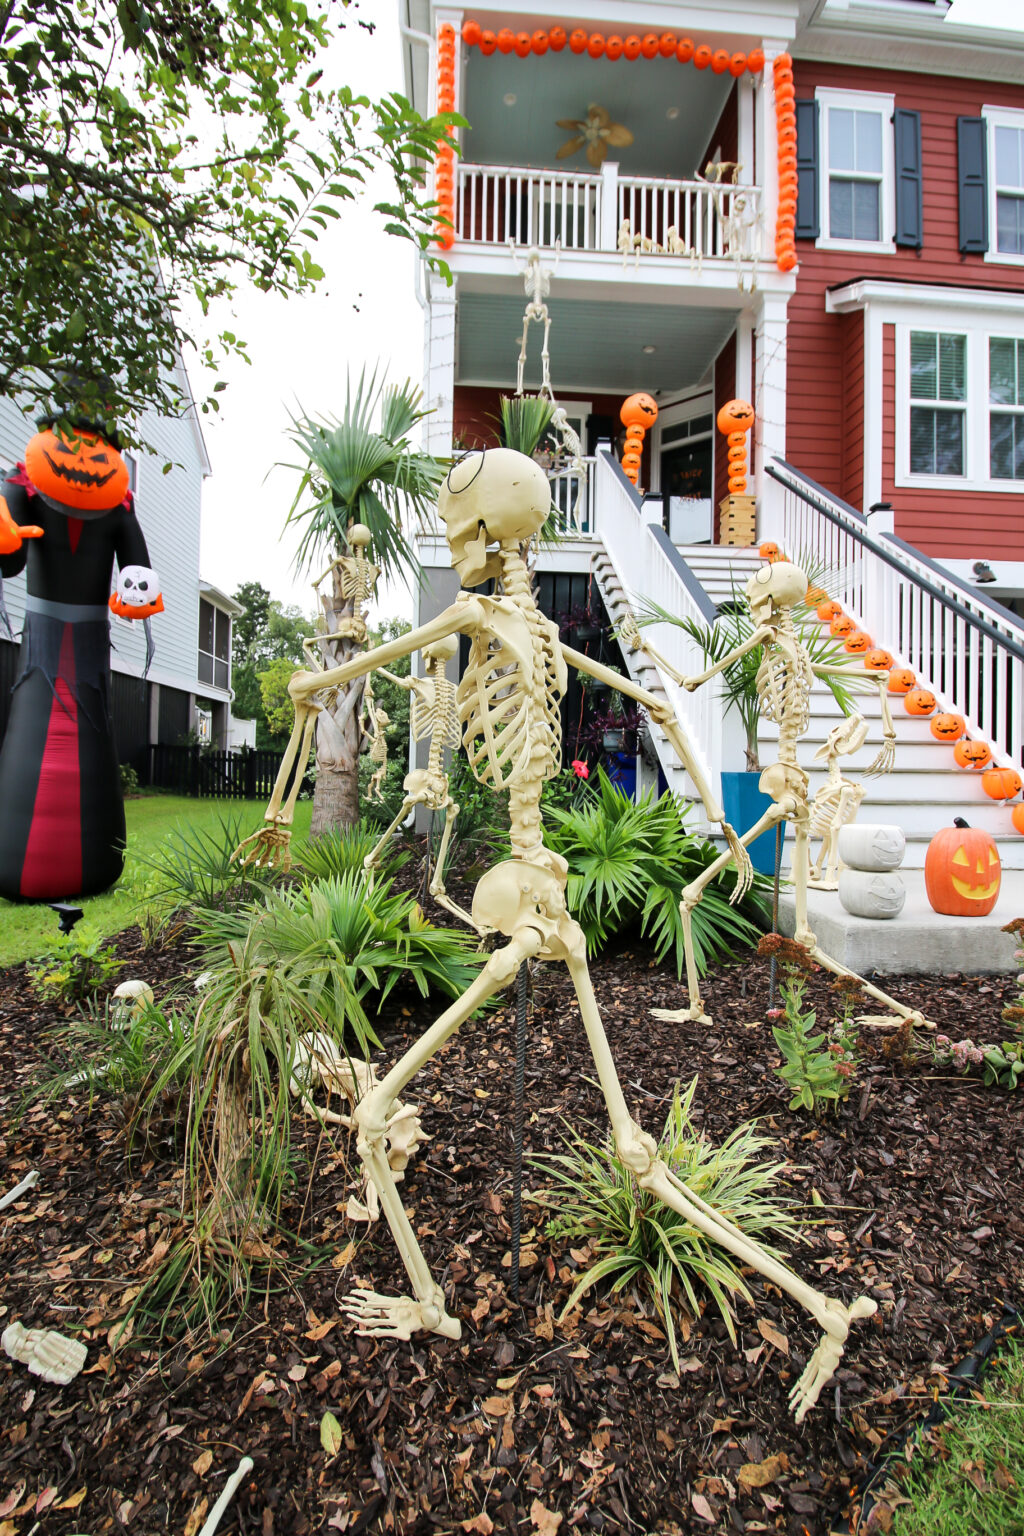 How to pose skeletons in your yard